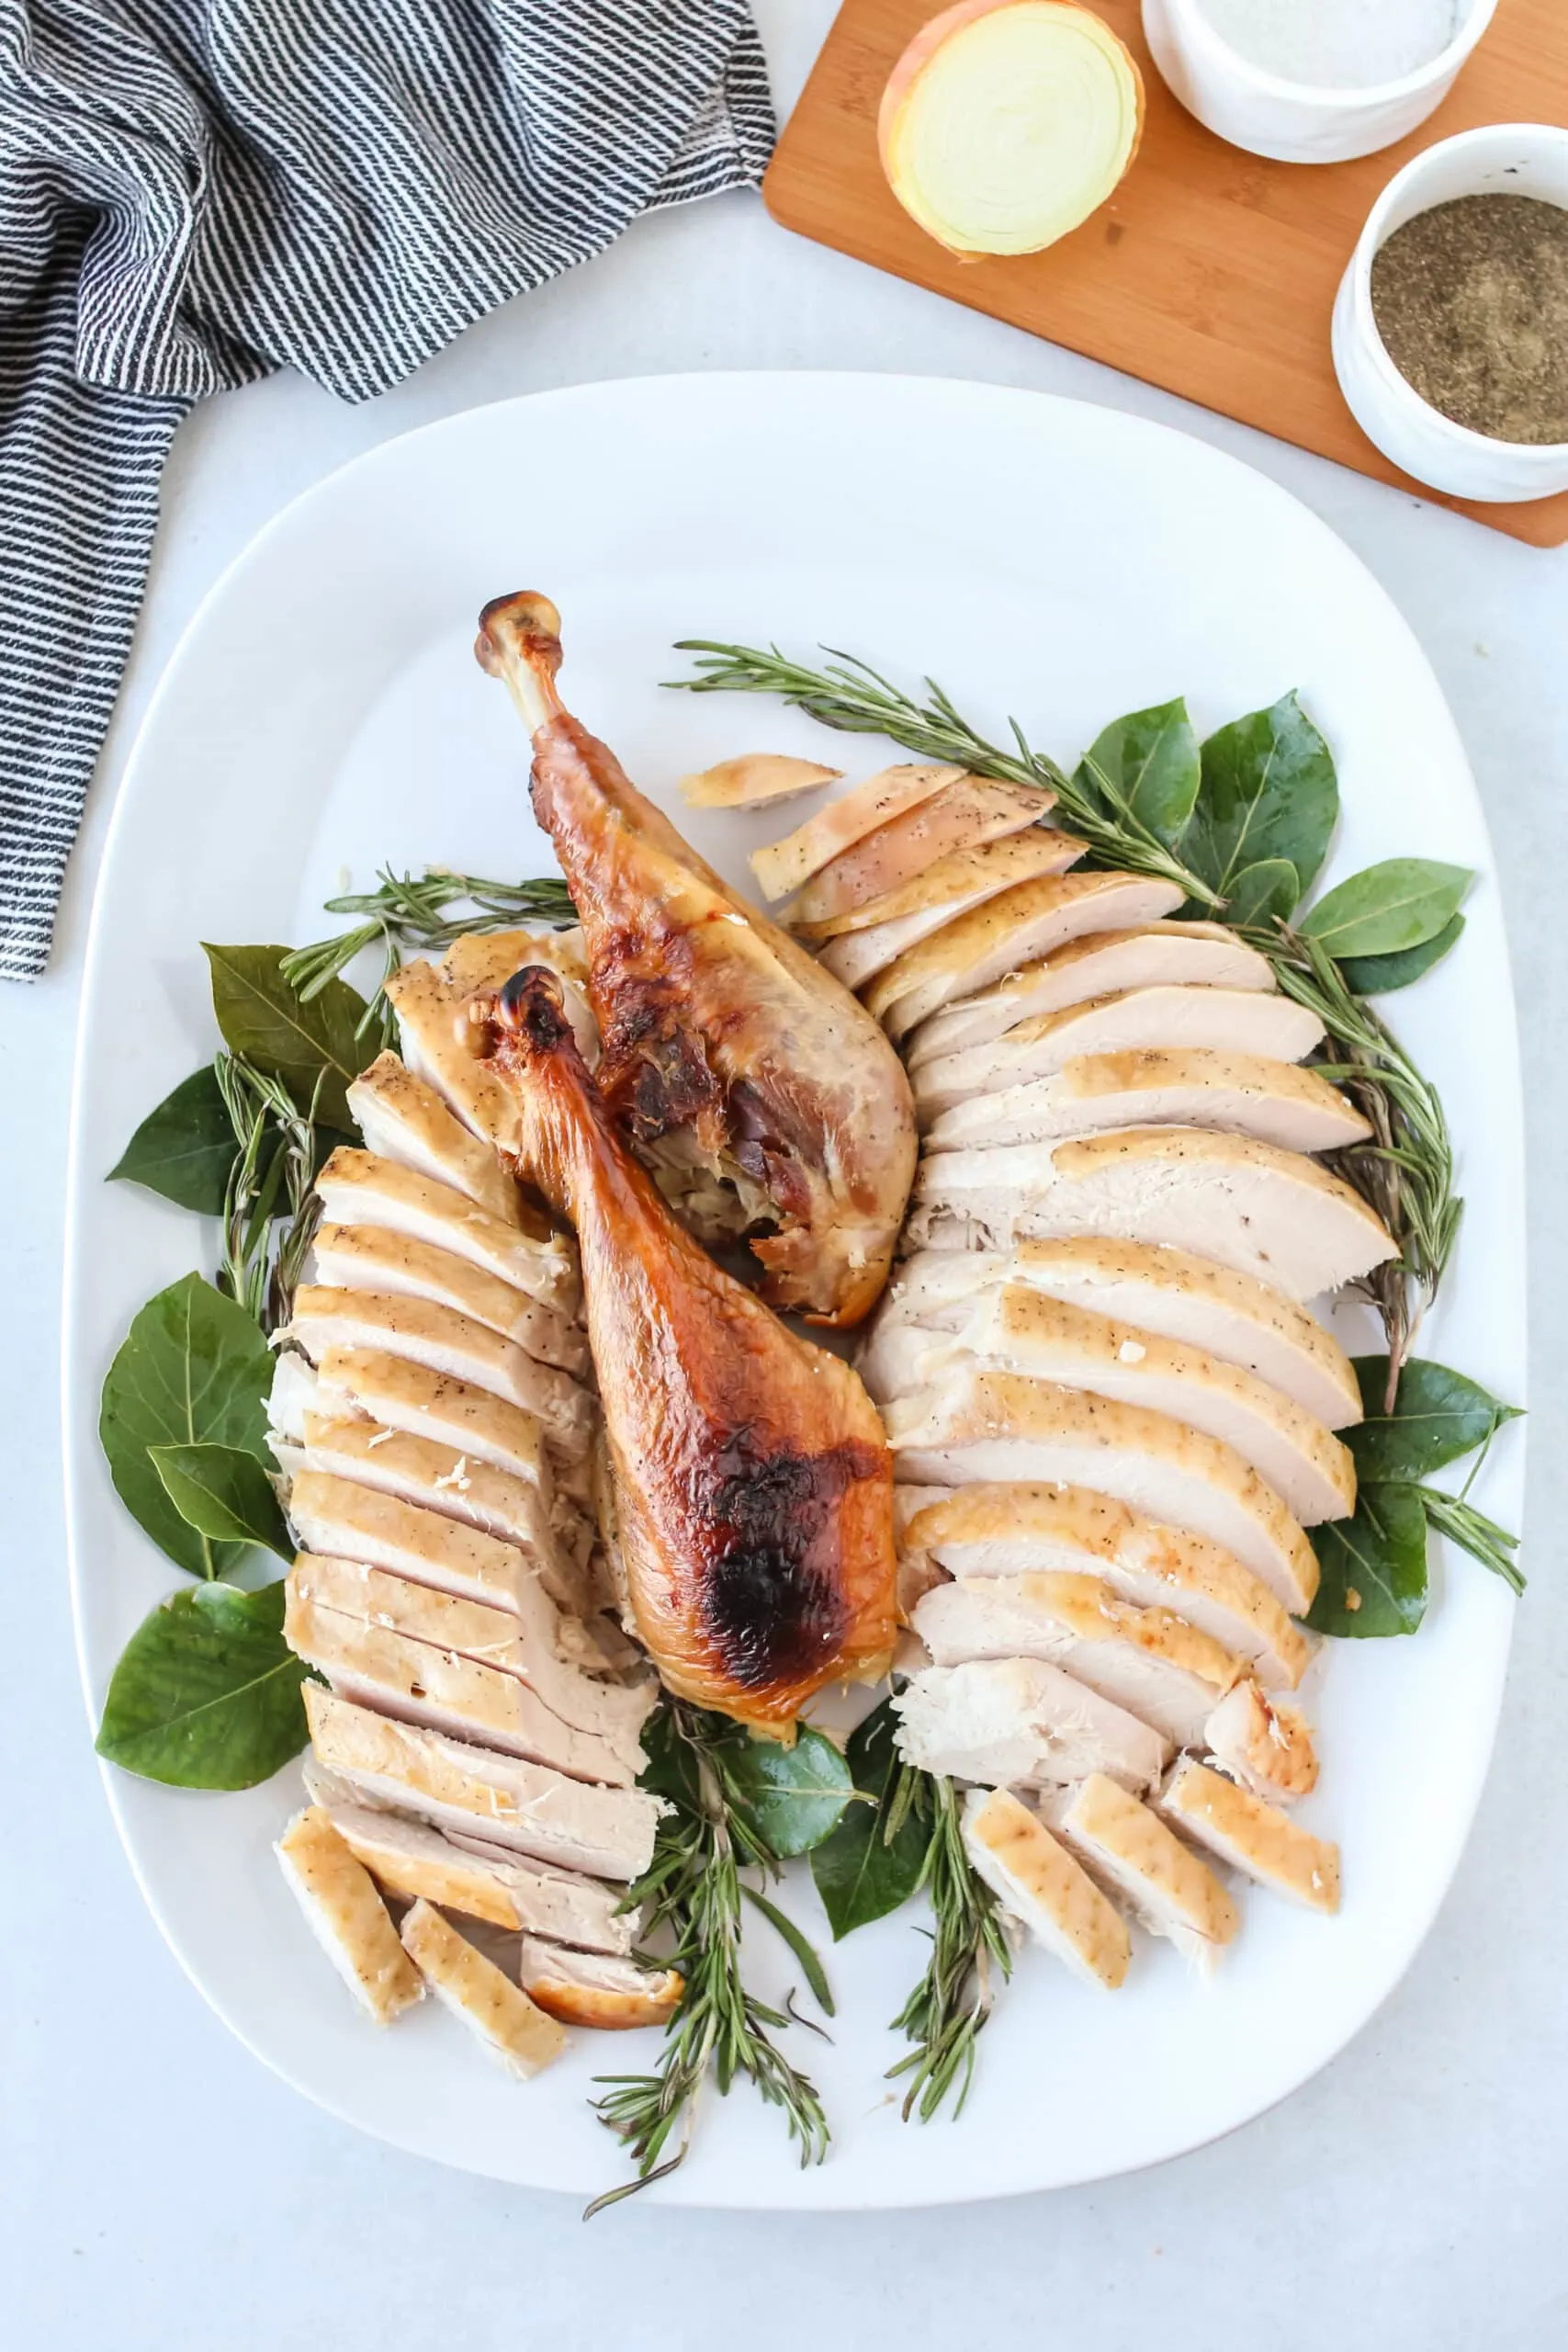 carved turkey on a platter and ready to serve, zoomed out image